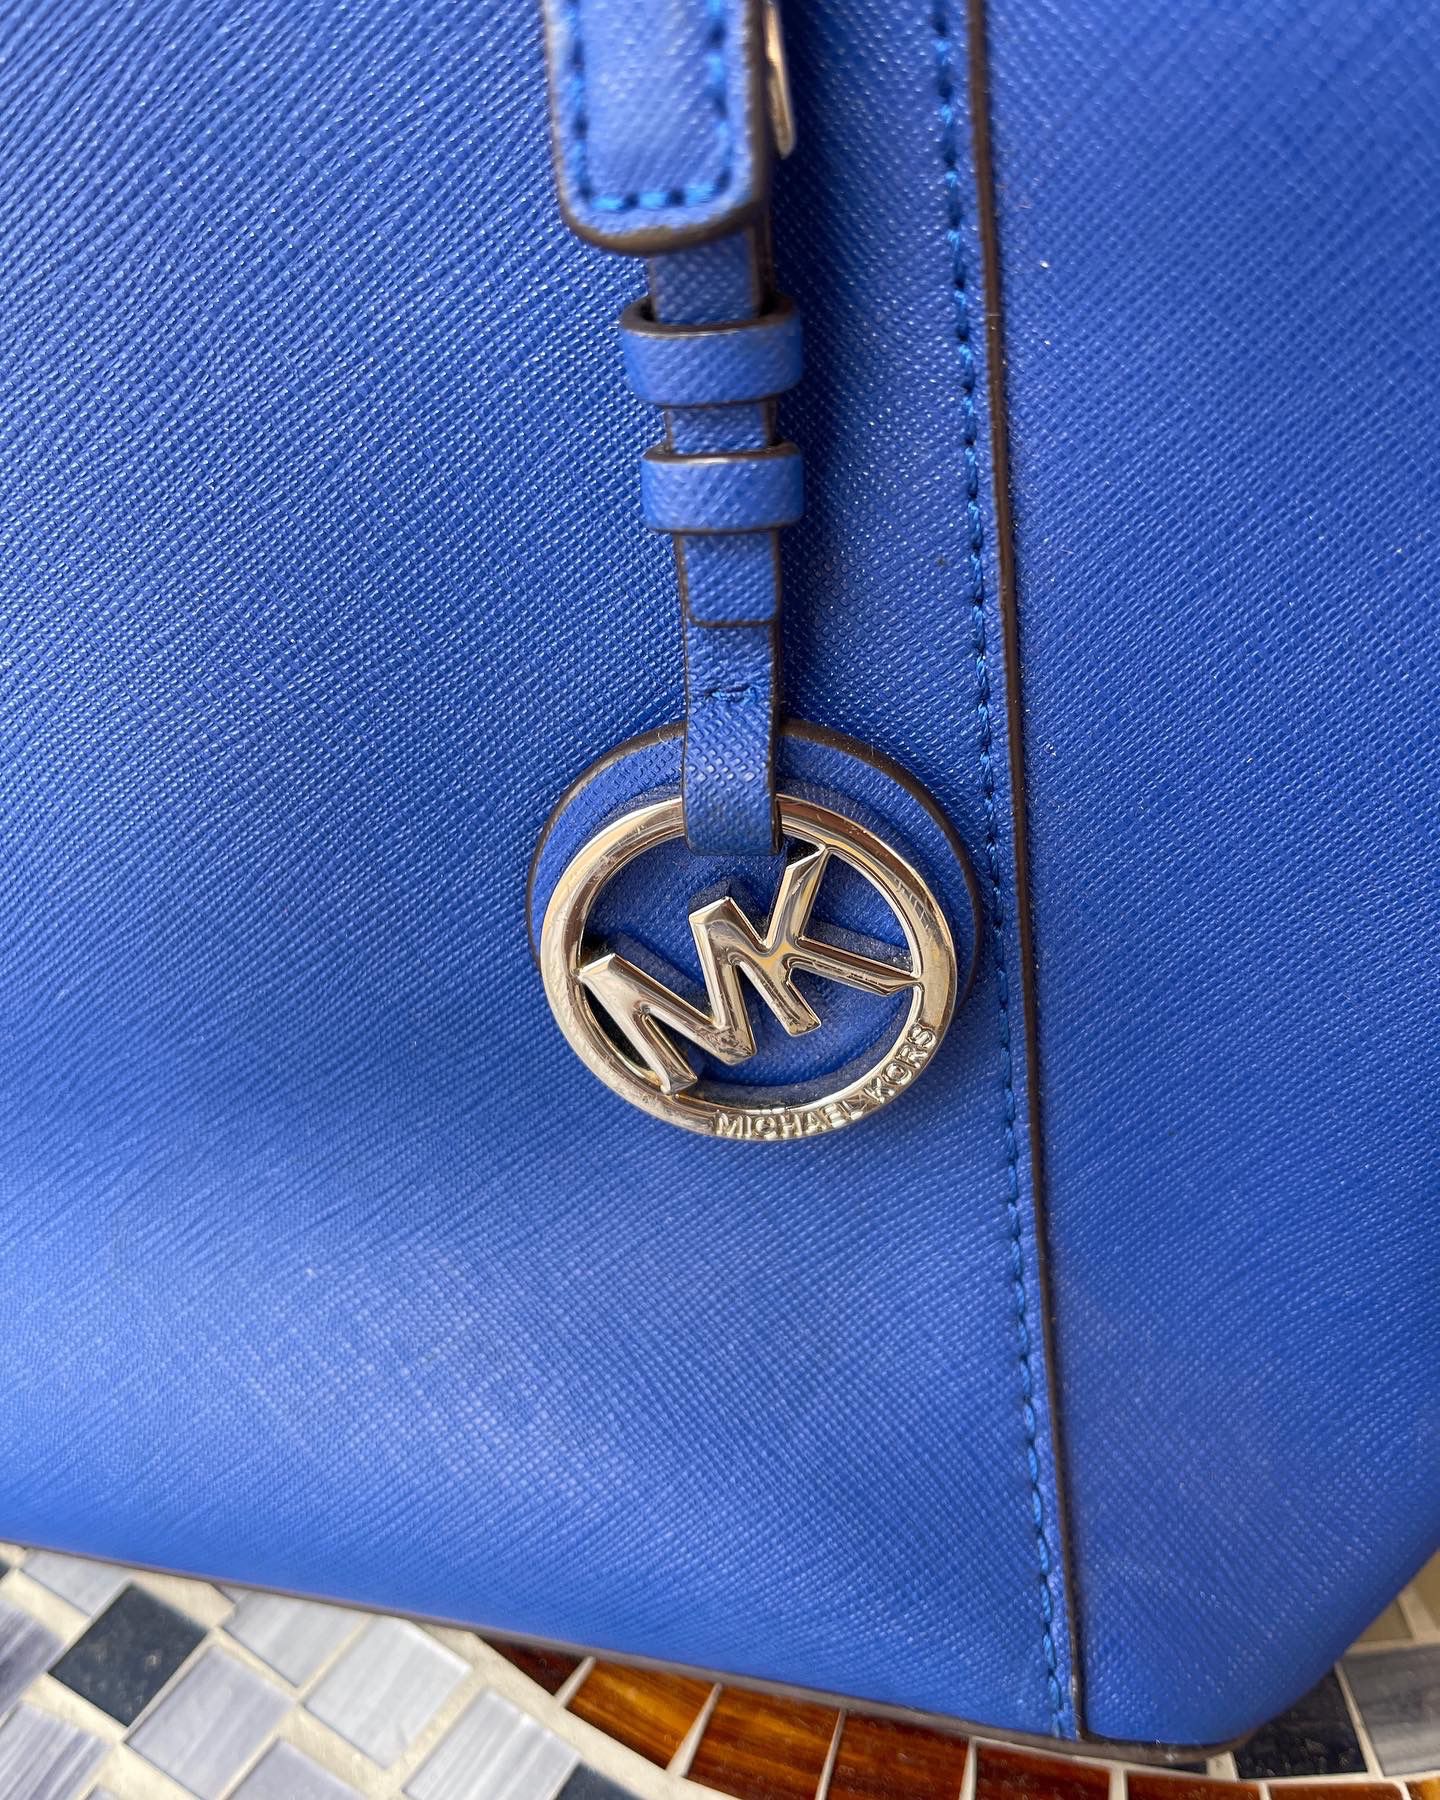 Royal Blue Michael Kors purse for Sale in Bakersfield, CA - OfferUp